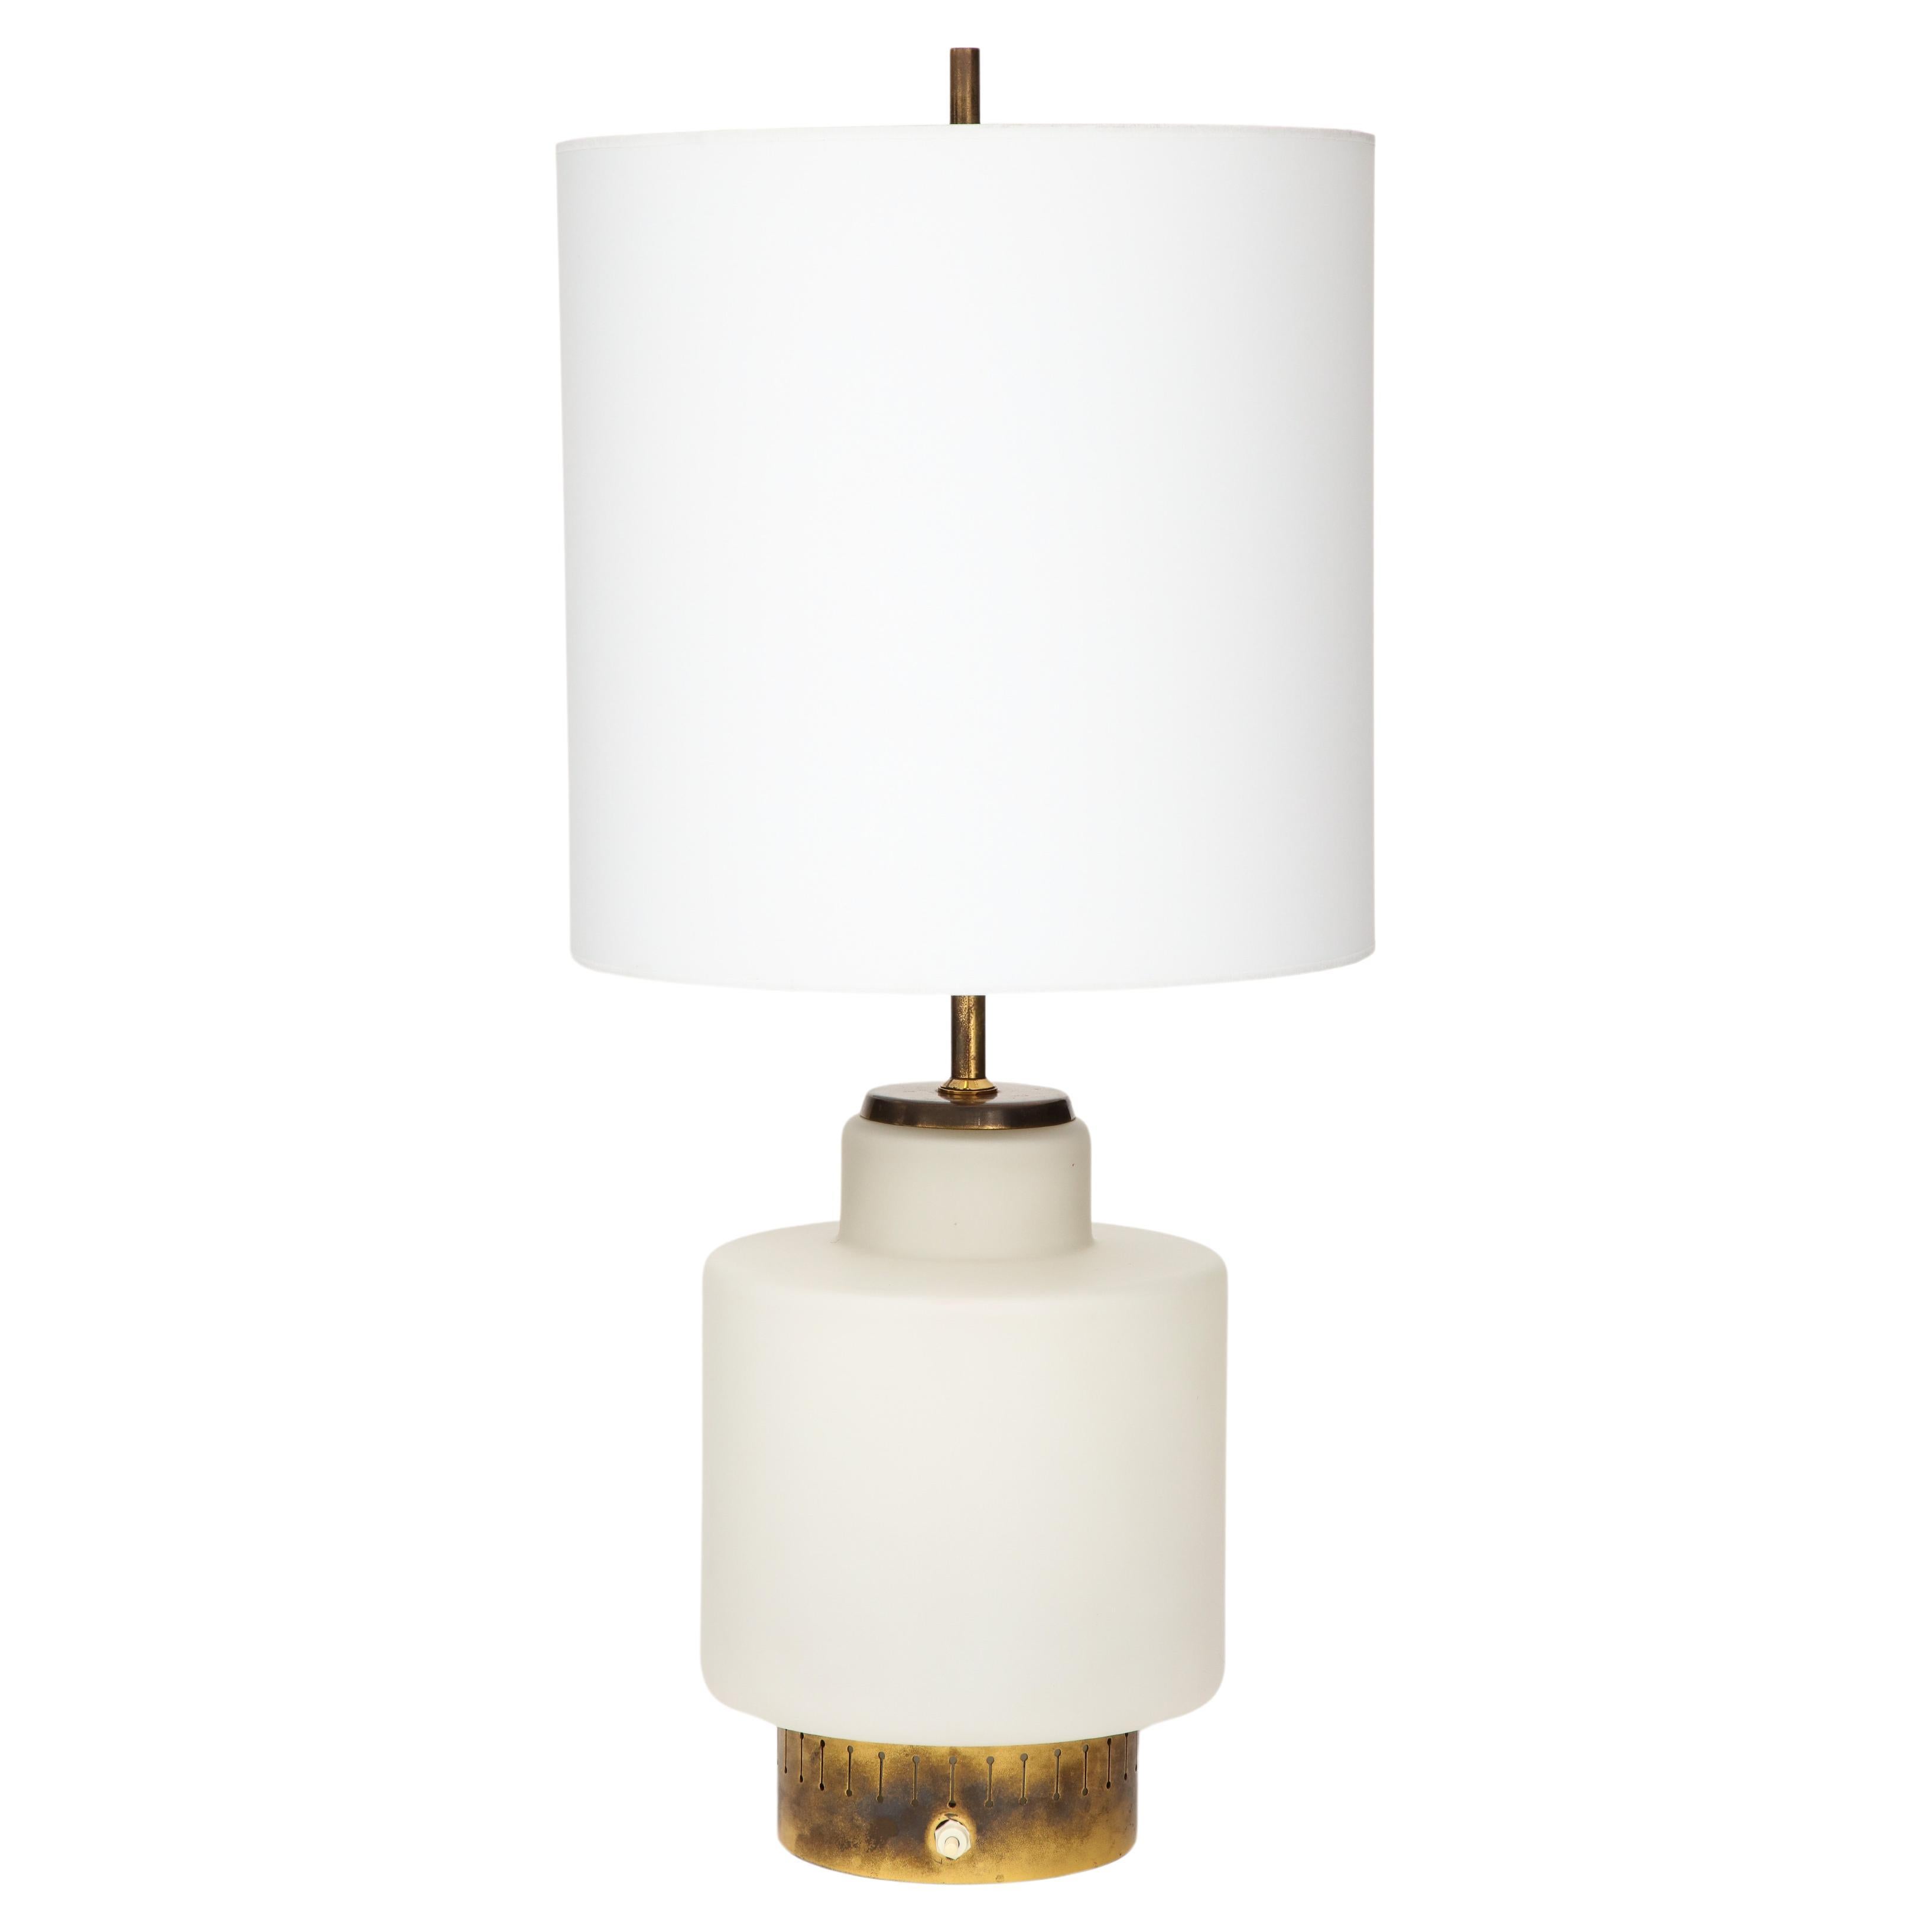 Stilnovo Opaline & Brass Lamp, mod. 8055, Parchment Shade, Italy, c. 1950's For Sale